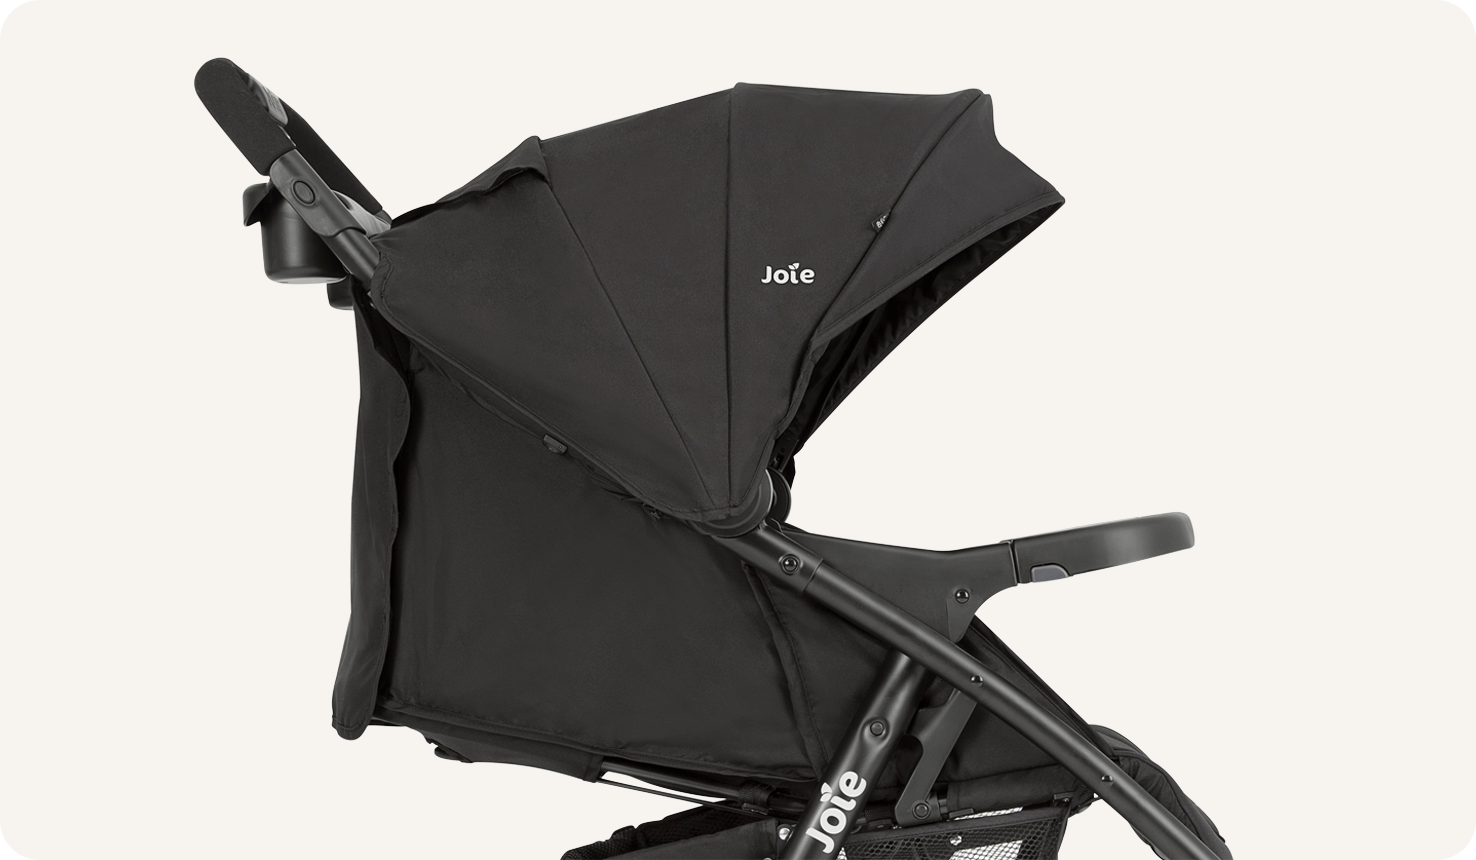  Joie i-Muze lx travel system pushchair in black close-up of the seat reclined.